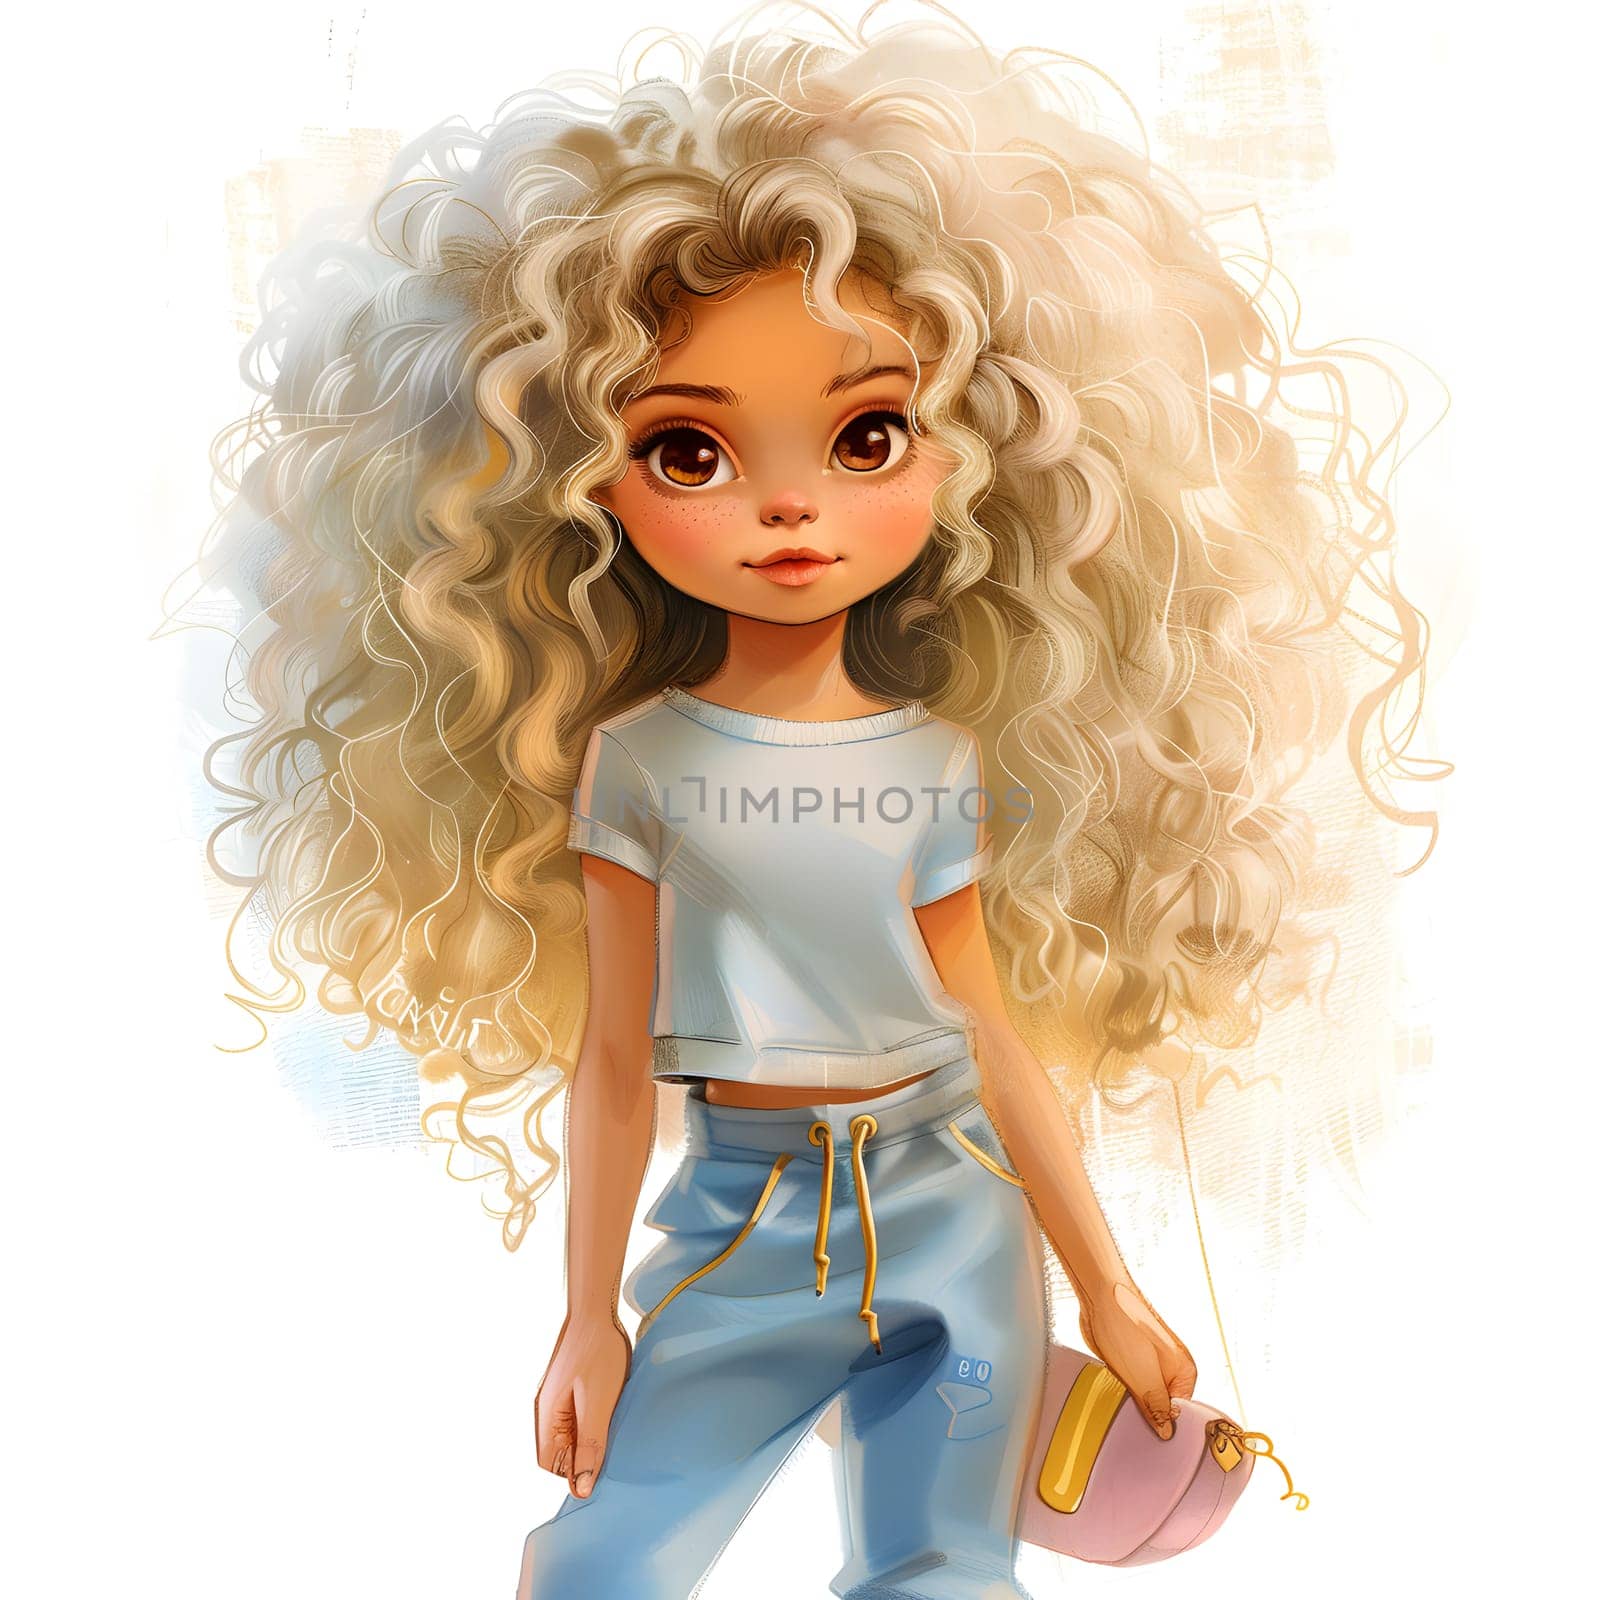 A cartoon girl with curly blonde hair is holding a pink purse, wearing a cute dress with long sleeves and a matching wig. She looks like a doll with her fawnlike eyes